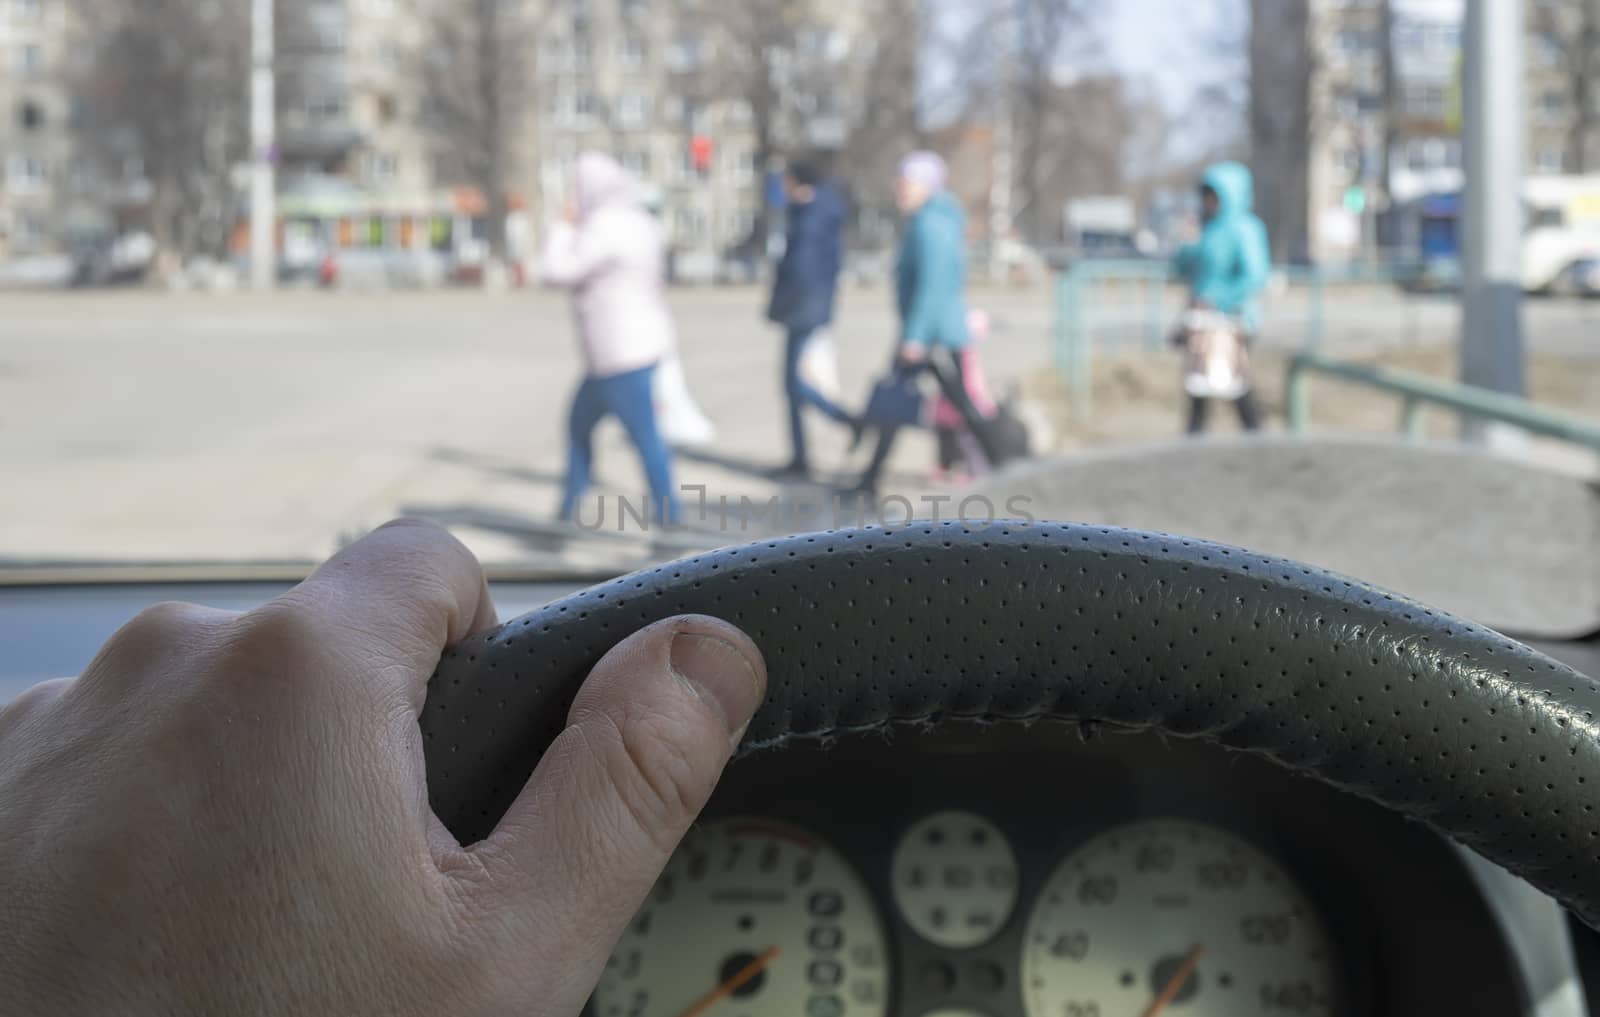 view from the car, the man's hand on the steering wheel of the car, located opposite the pedestrian crossing and pedestrians crossing the road